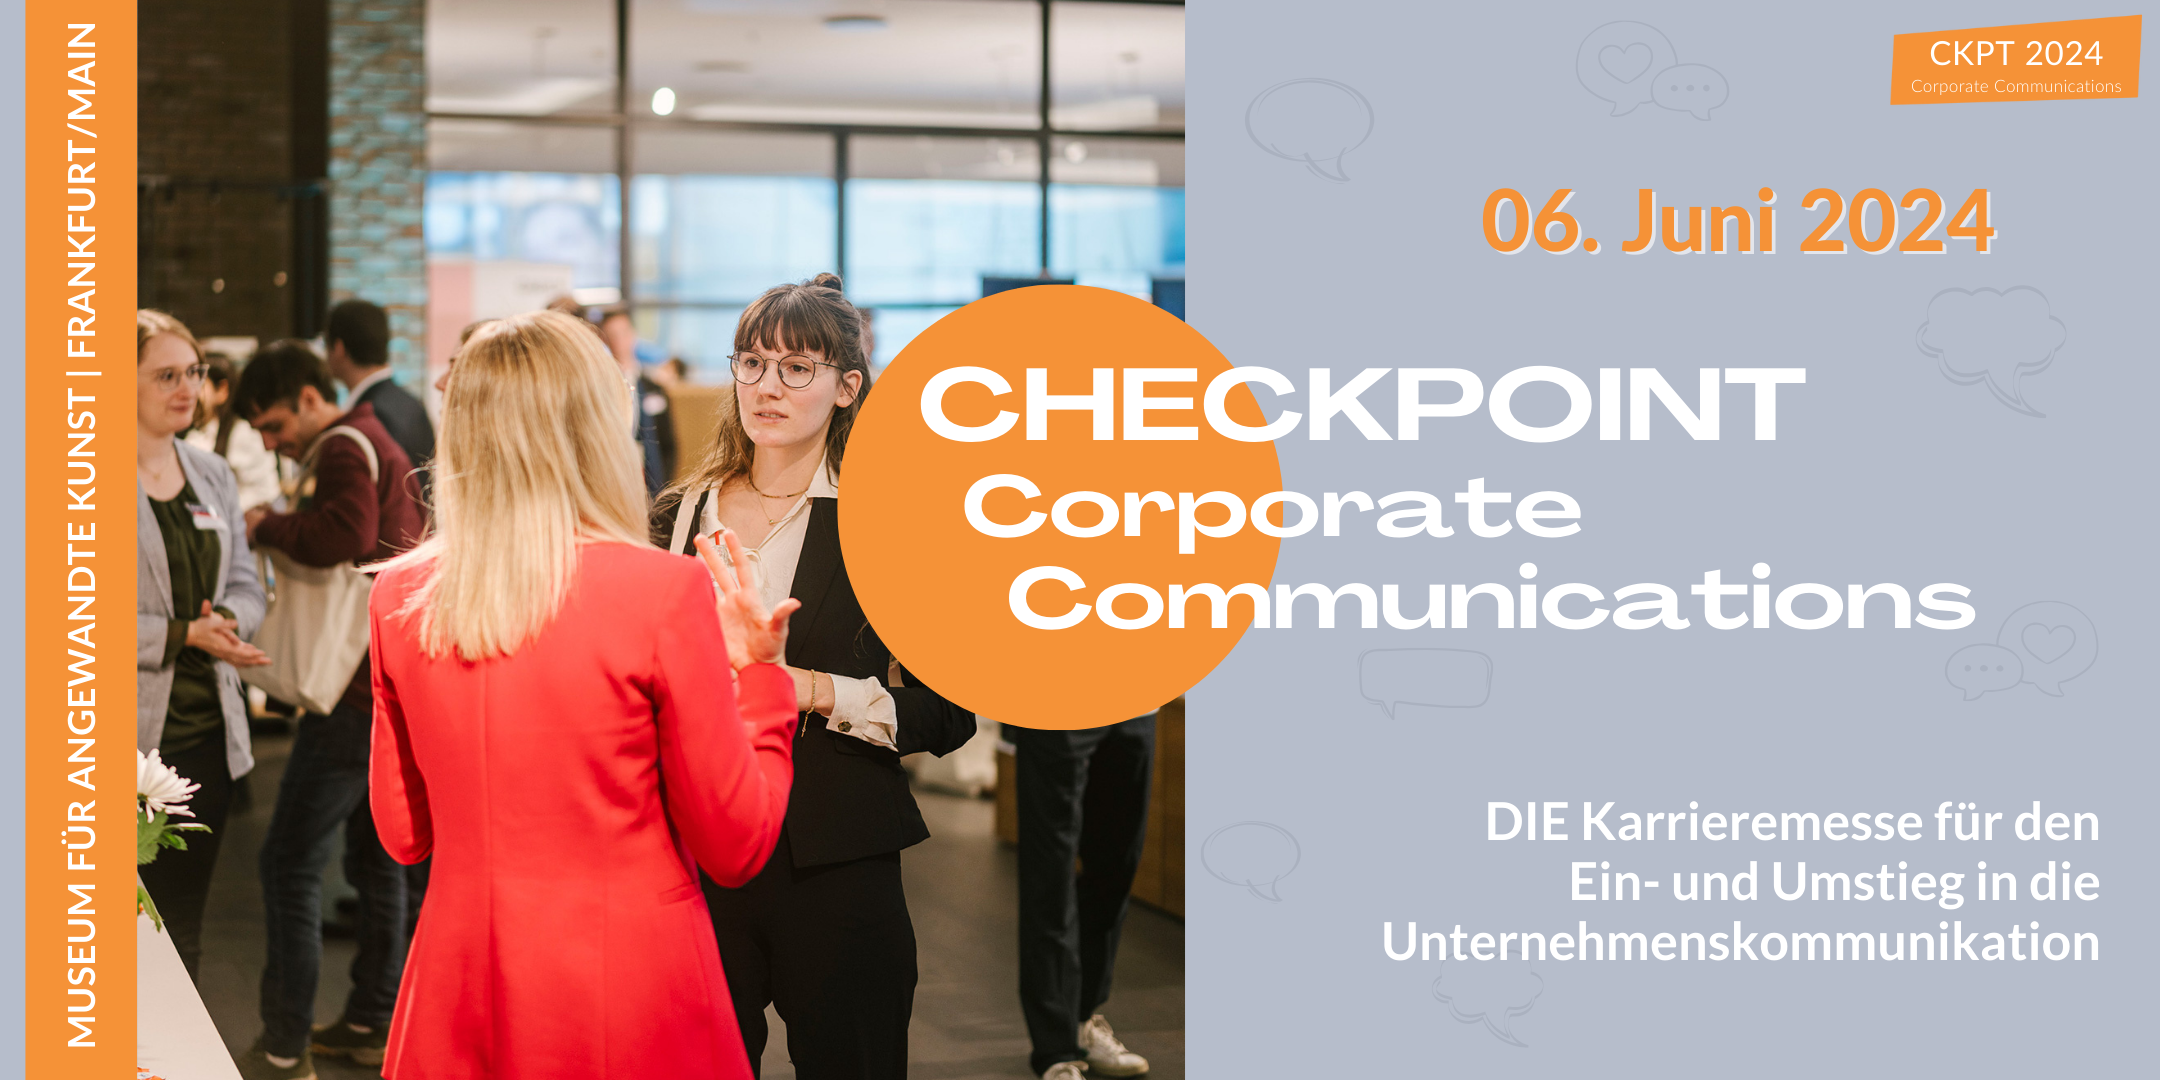 CHECKPOINT Corporate Communications 2024